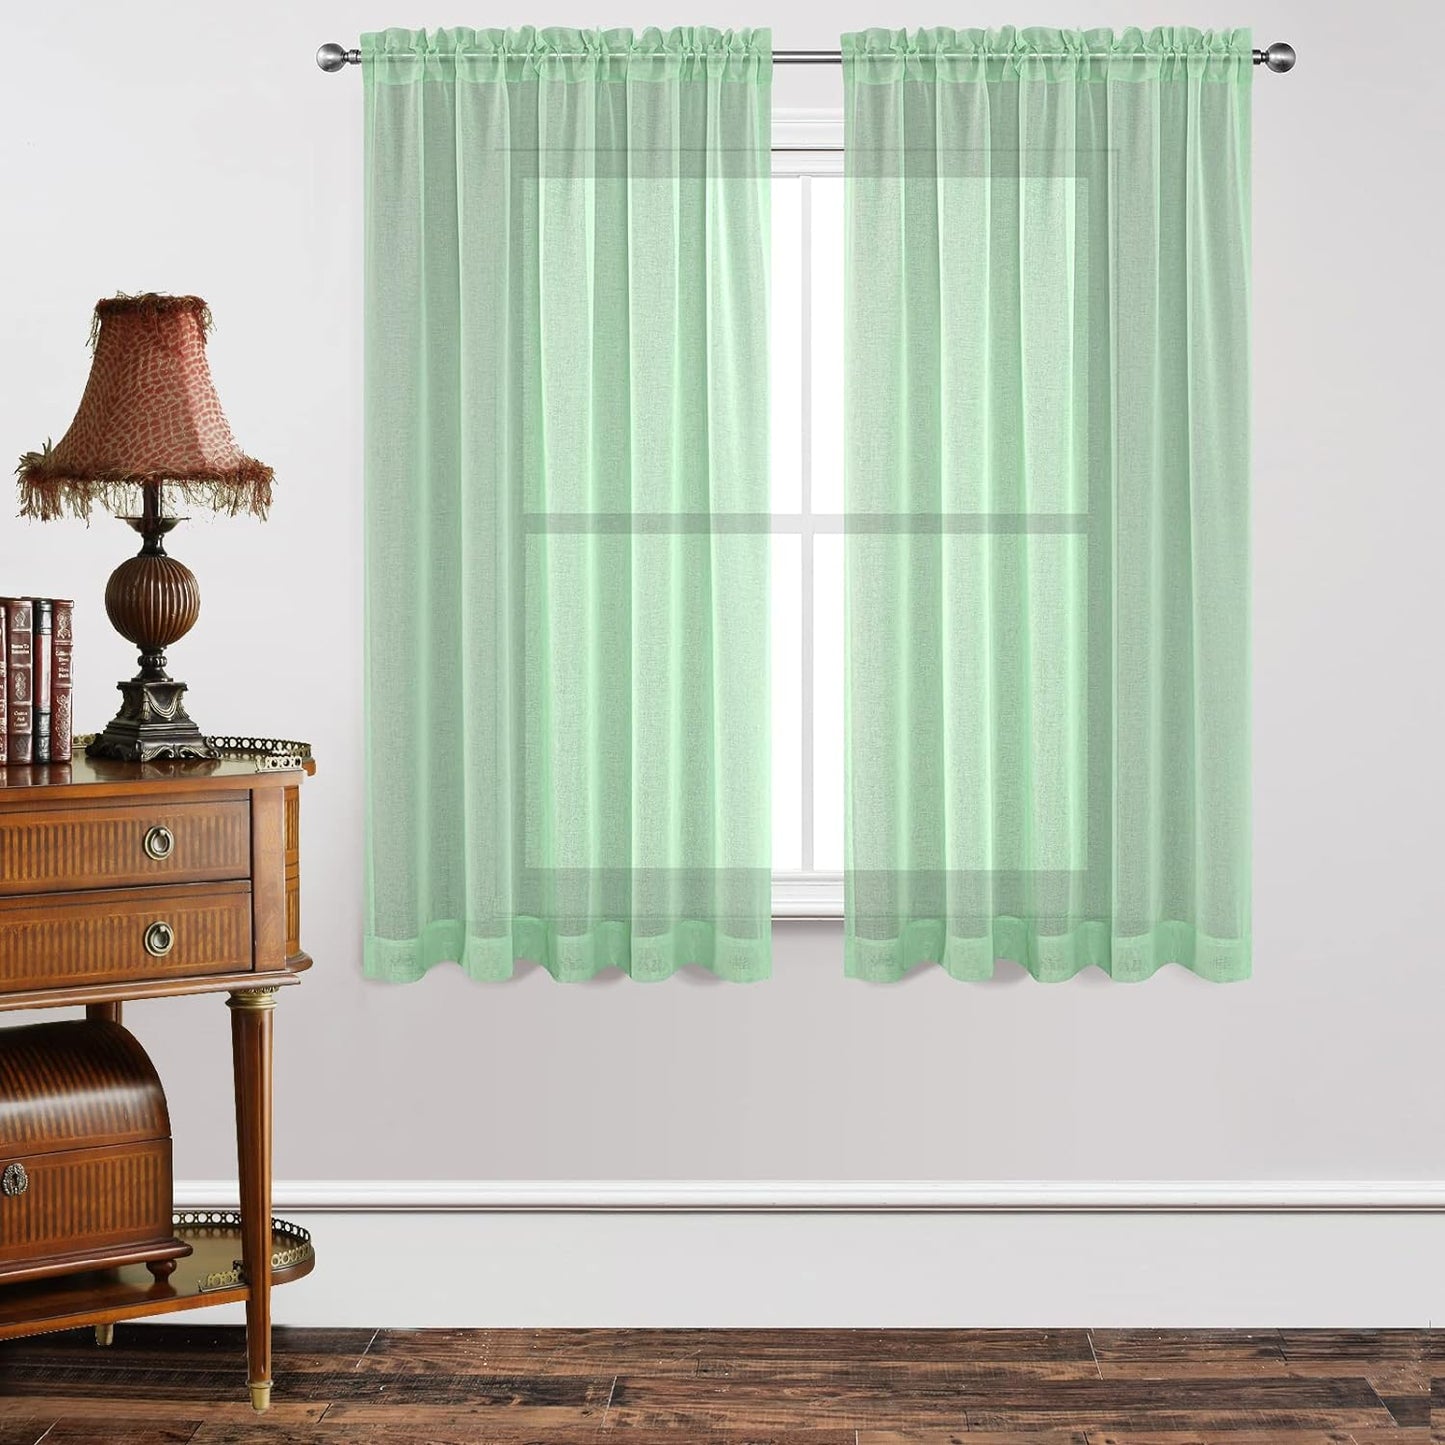 Joydeco White Sheer Curtains 63 Inch Length 2 Panels Set, Rod Pocket Long Sheer Curtains for Window Bedroom Living Room, Lightweight Semi Drape Panels for Yard Patio (54X63 Inch, off White)  Joydeco Mint Green 54W X 63L Inch X 2 Panels 